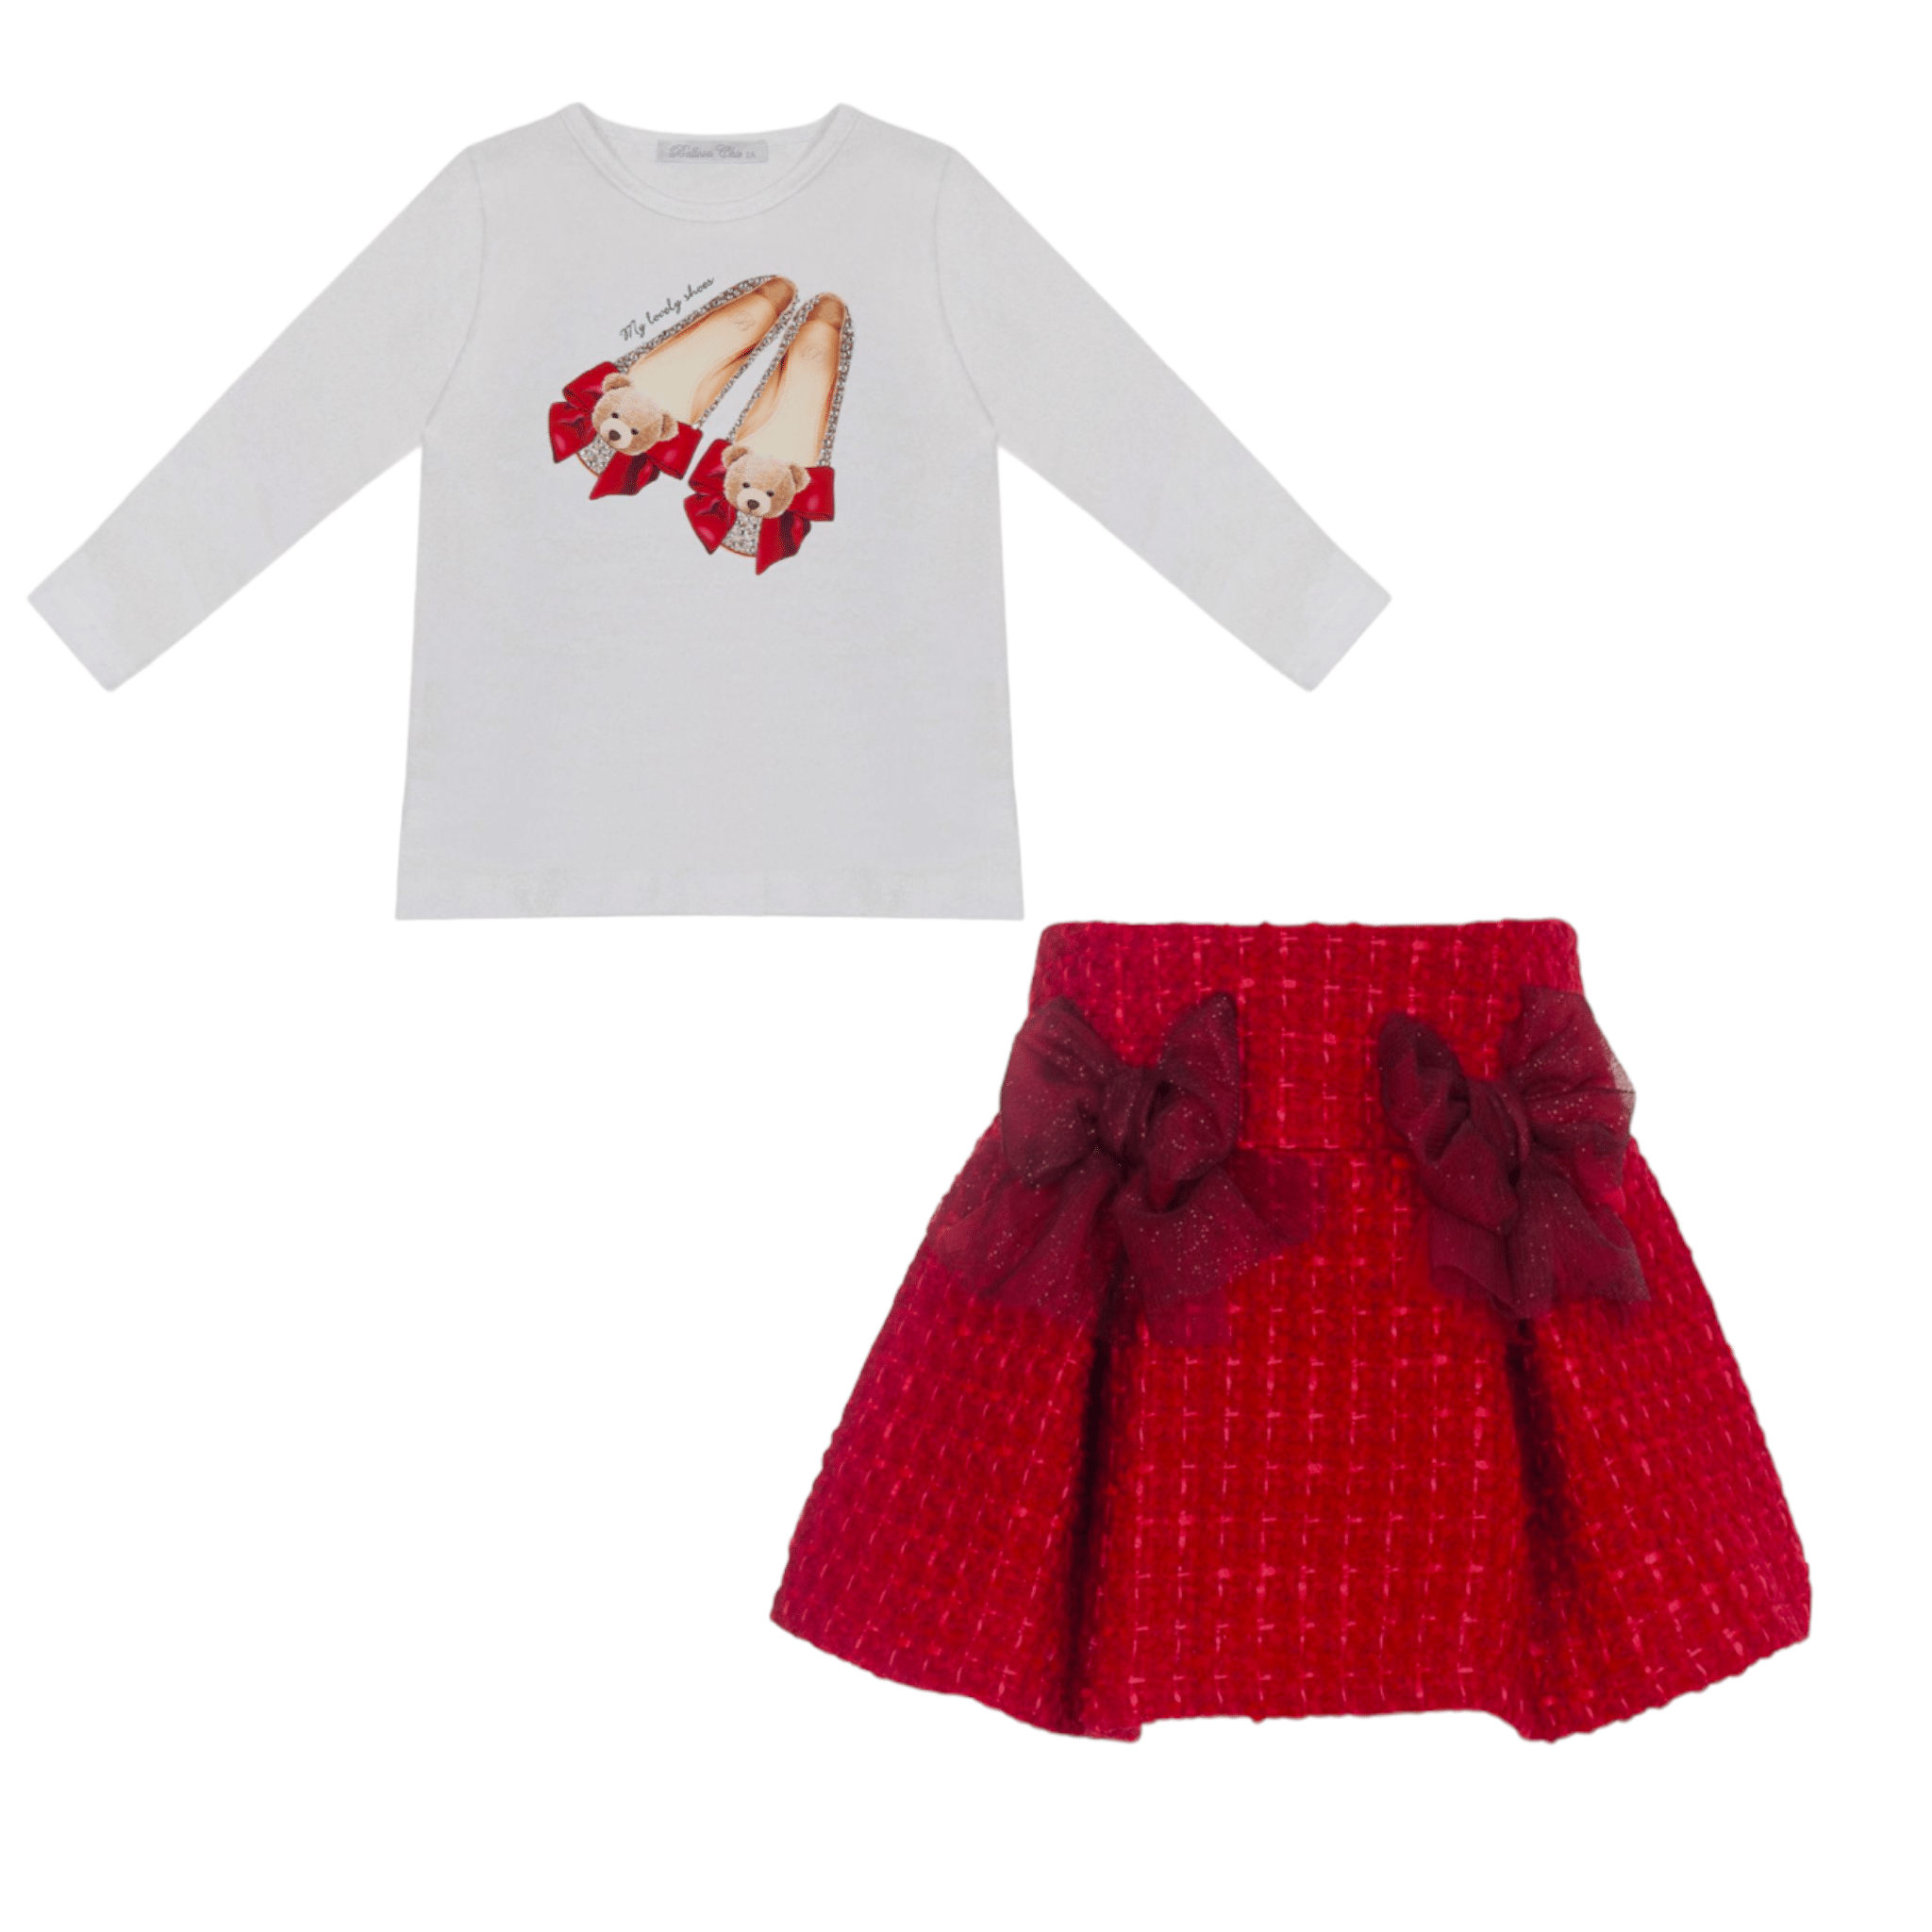 Balloon Chic Tops & Skirts Balloon Chic Girls White Red Shoes Skirt Set